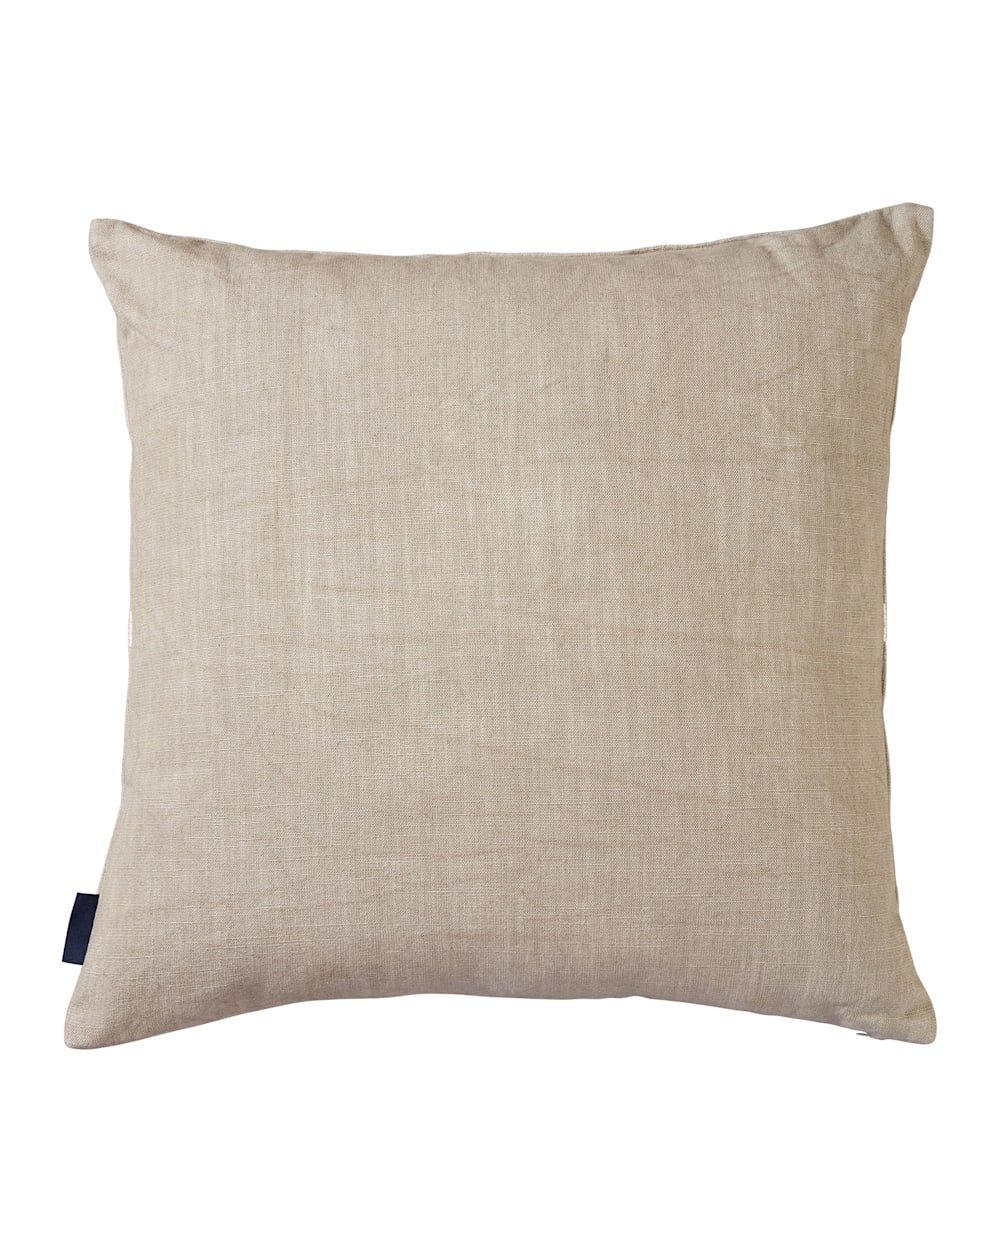 ALTERNATE VIEW OF JUNIPER MESA EMBROIDERED SQUARE PILLOW IN TAN MULTI image number 2